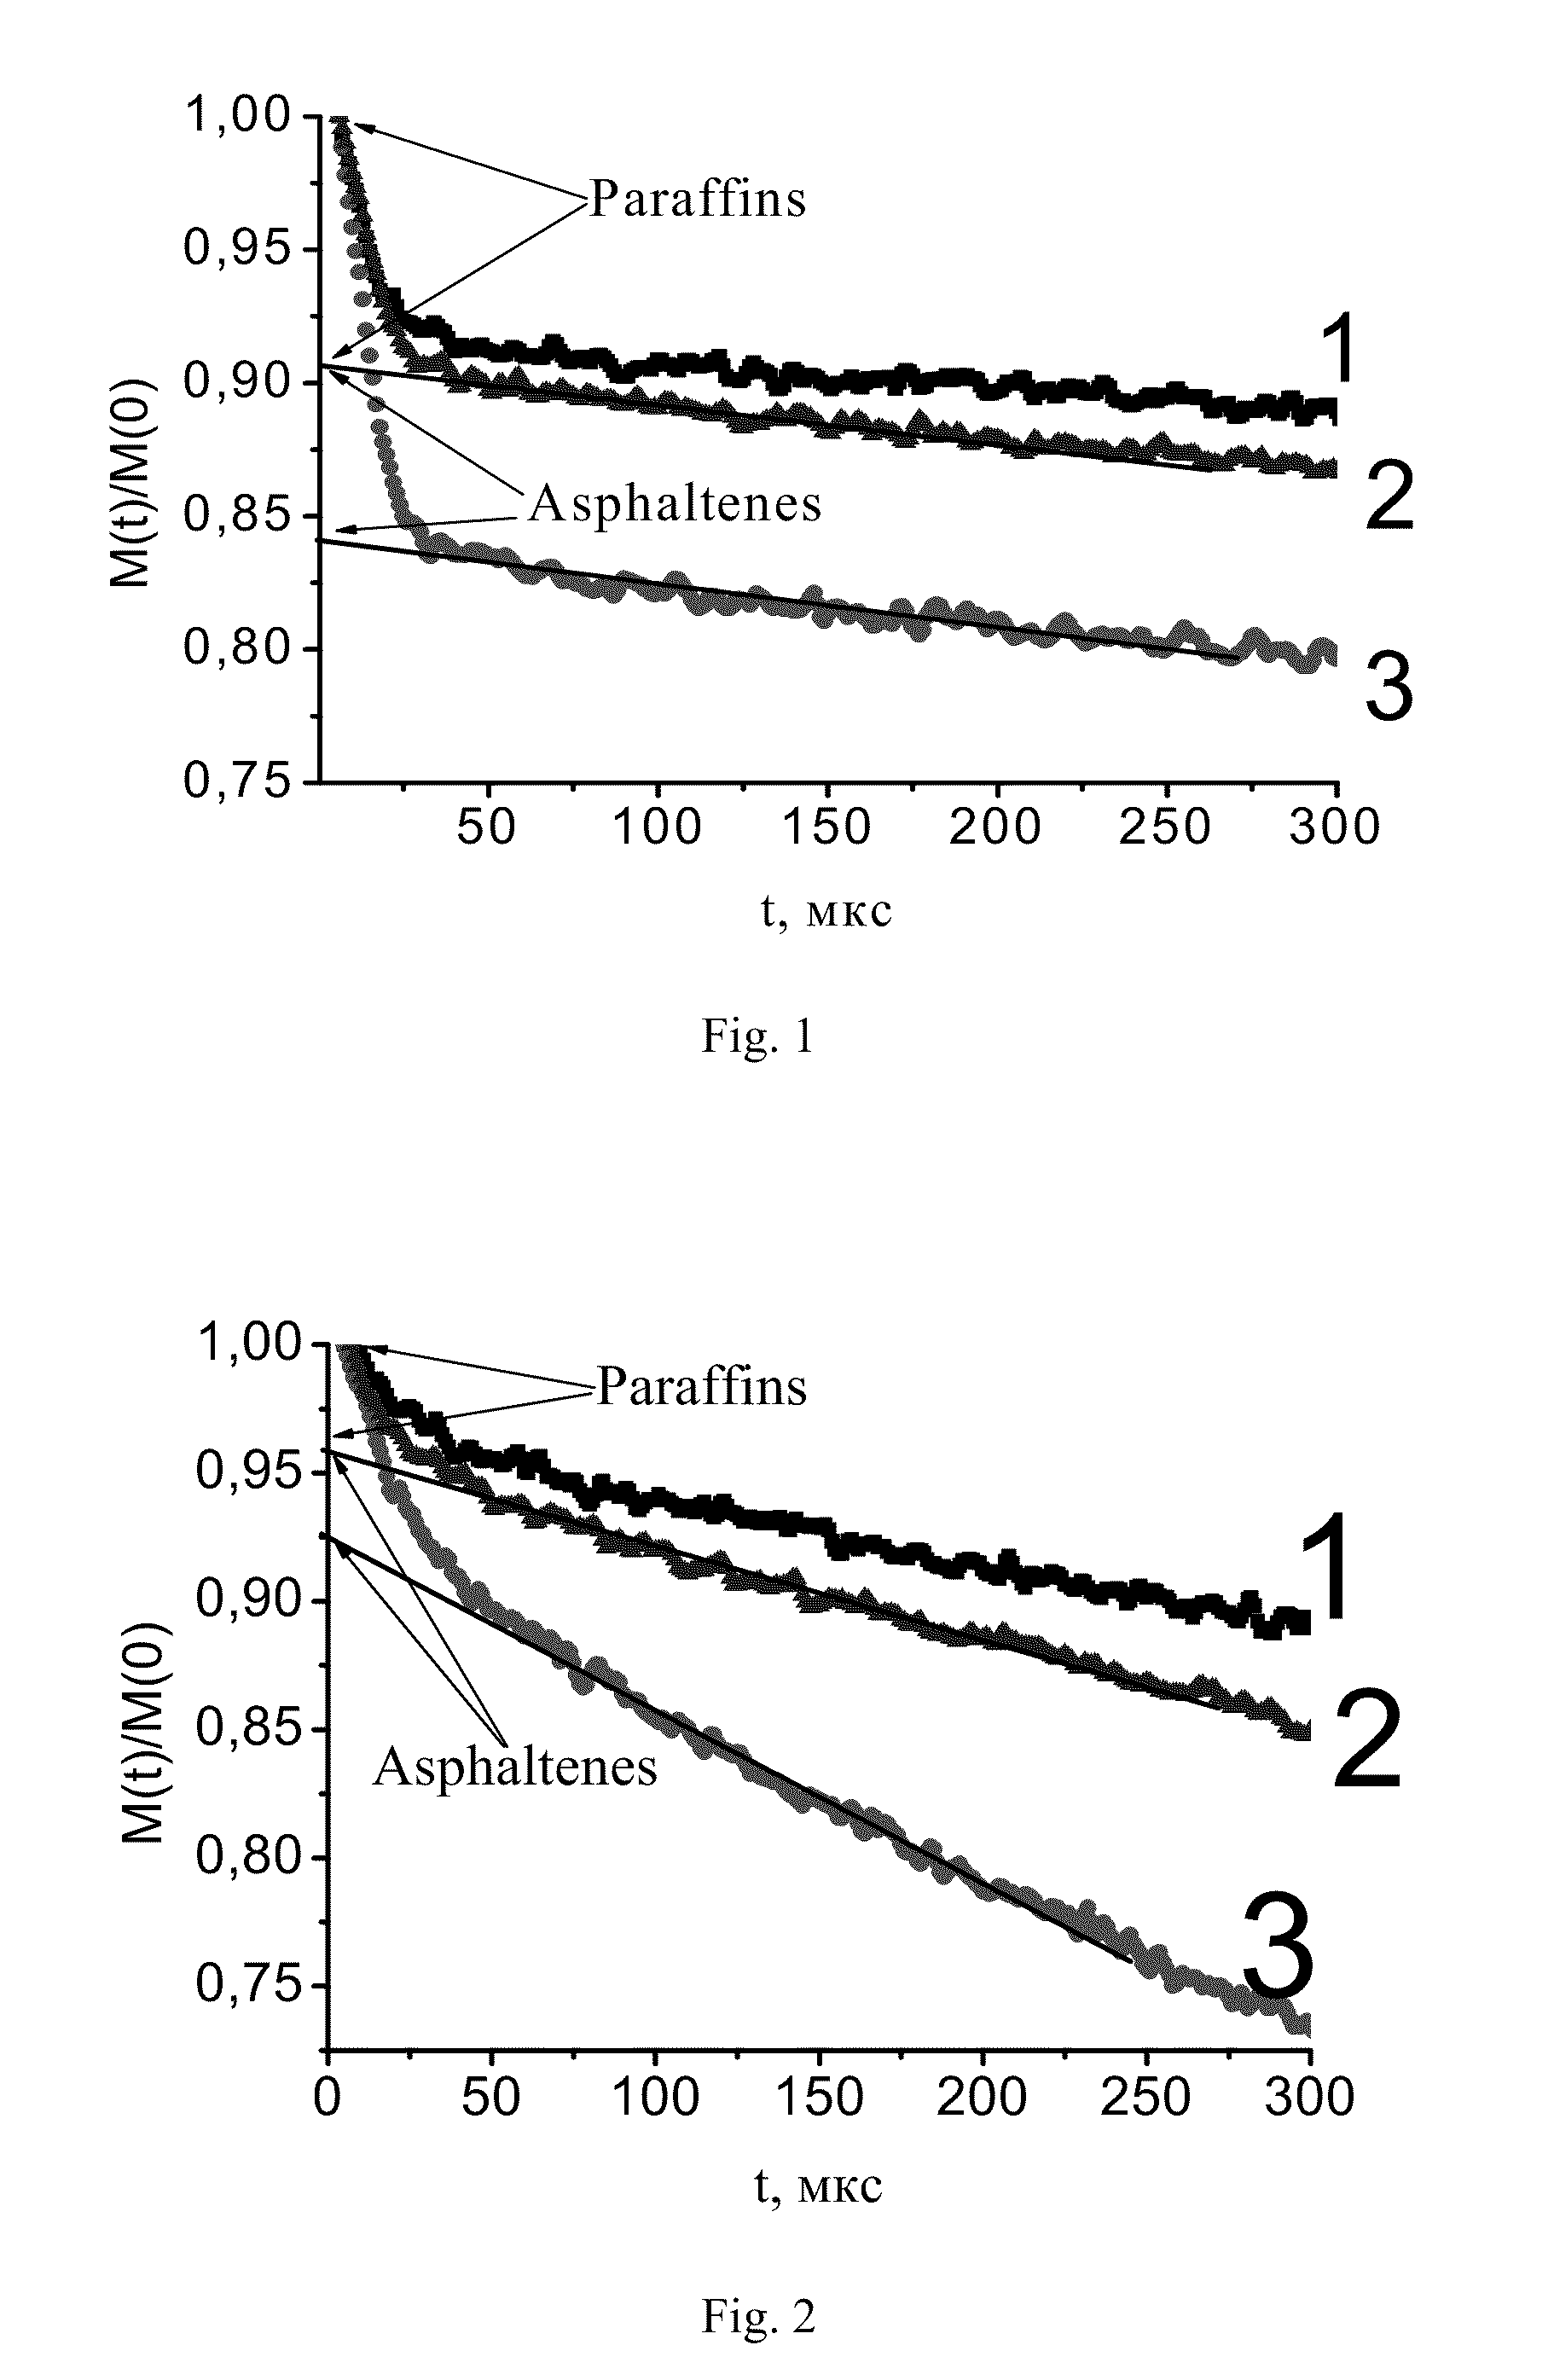 Method for detecting paraffin wax and asphaltene content in oil